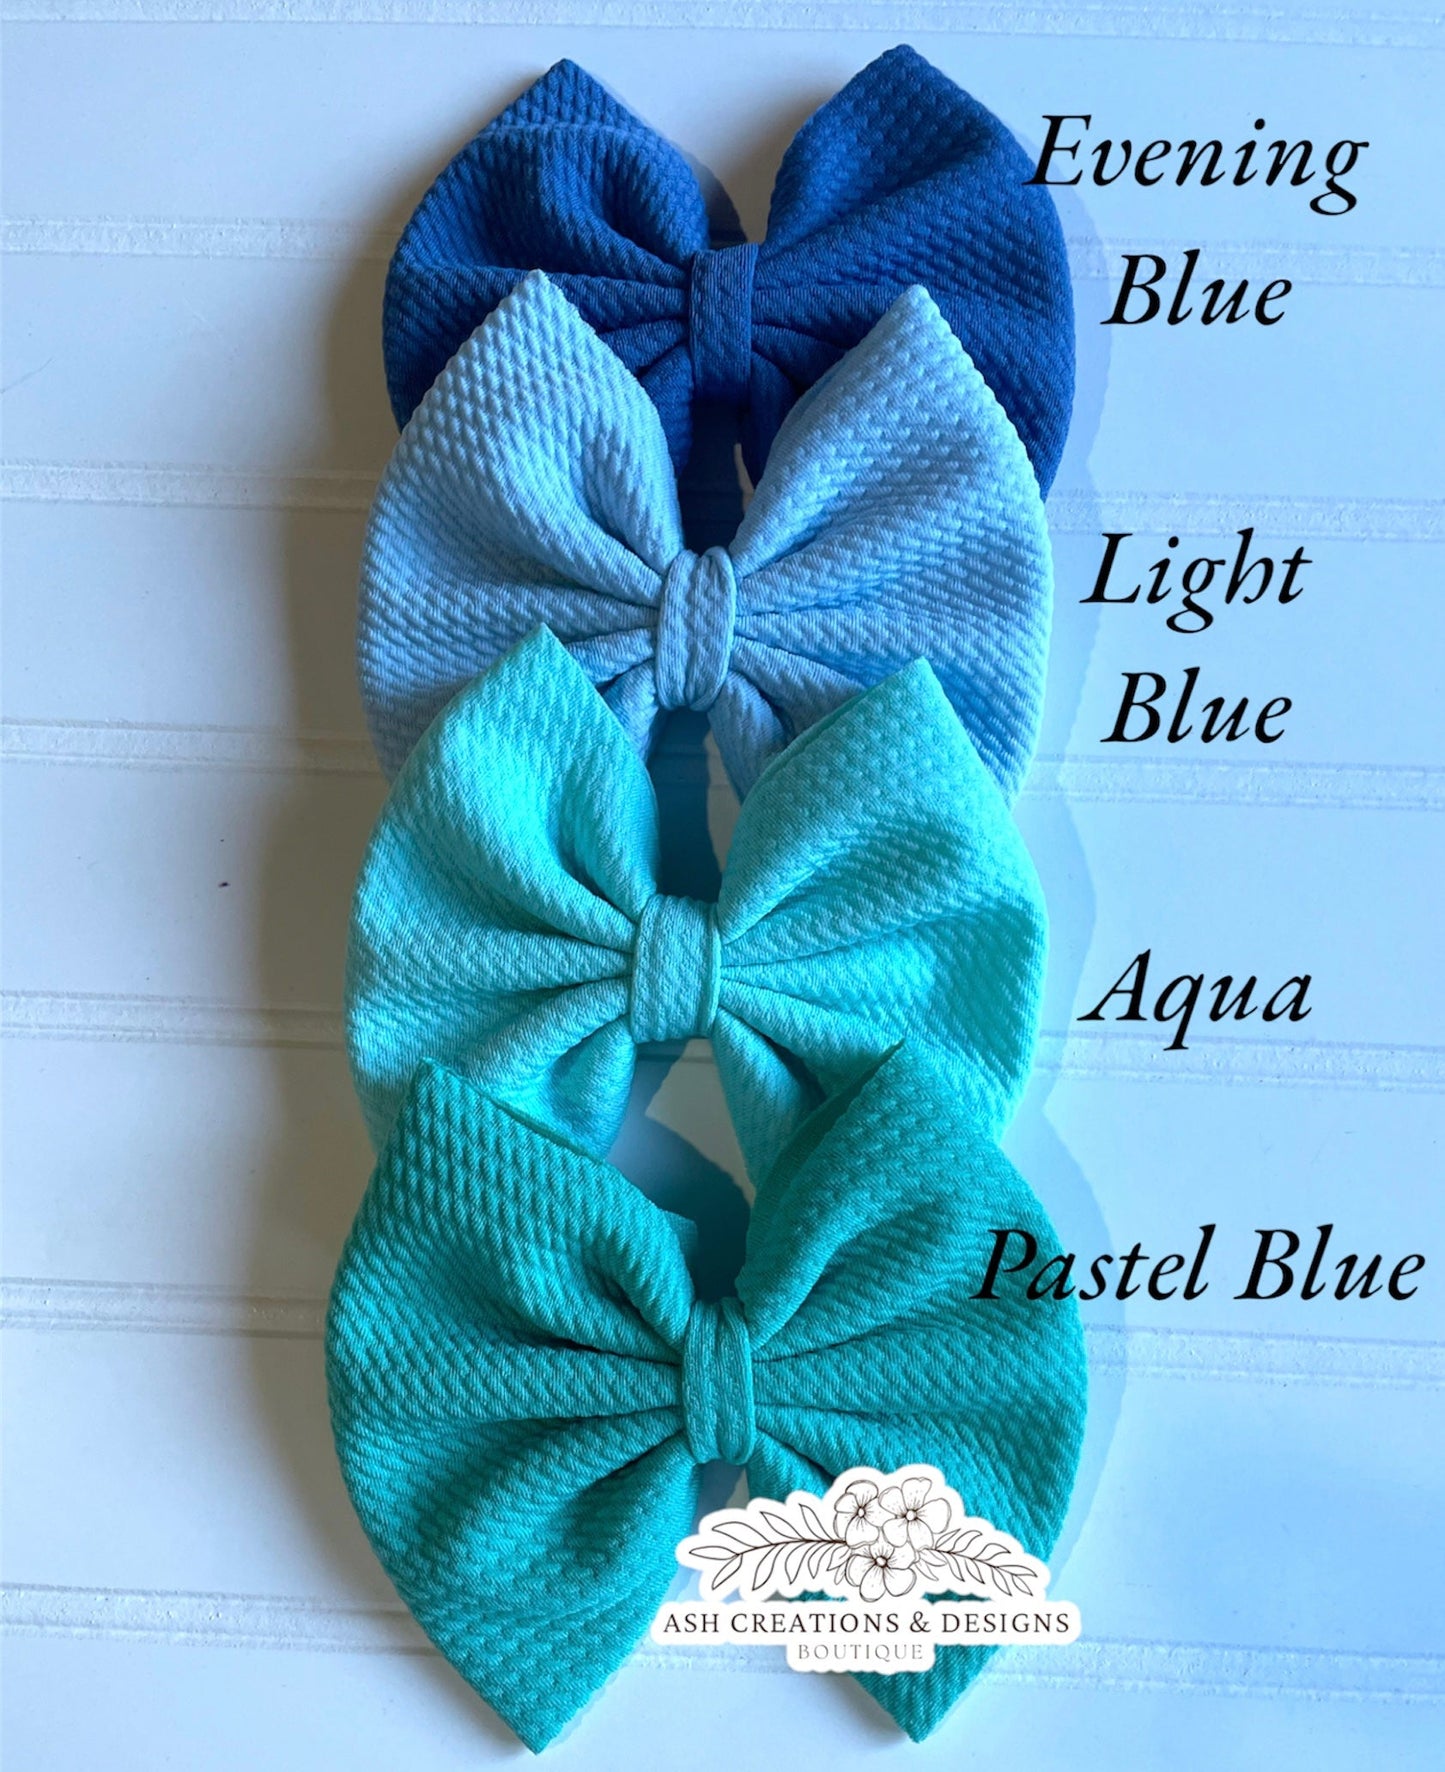 Whole sale Bows (Solids Only)